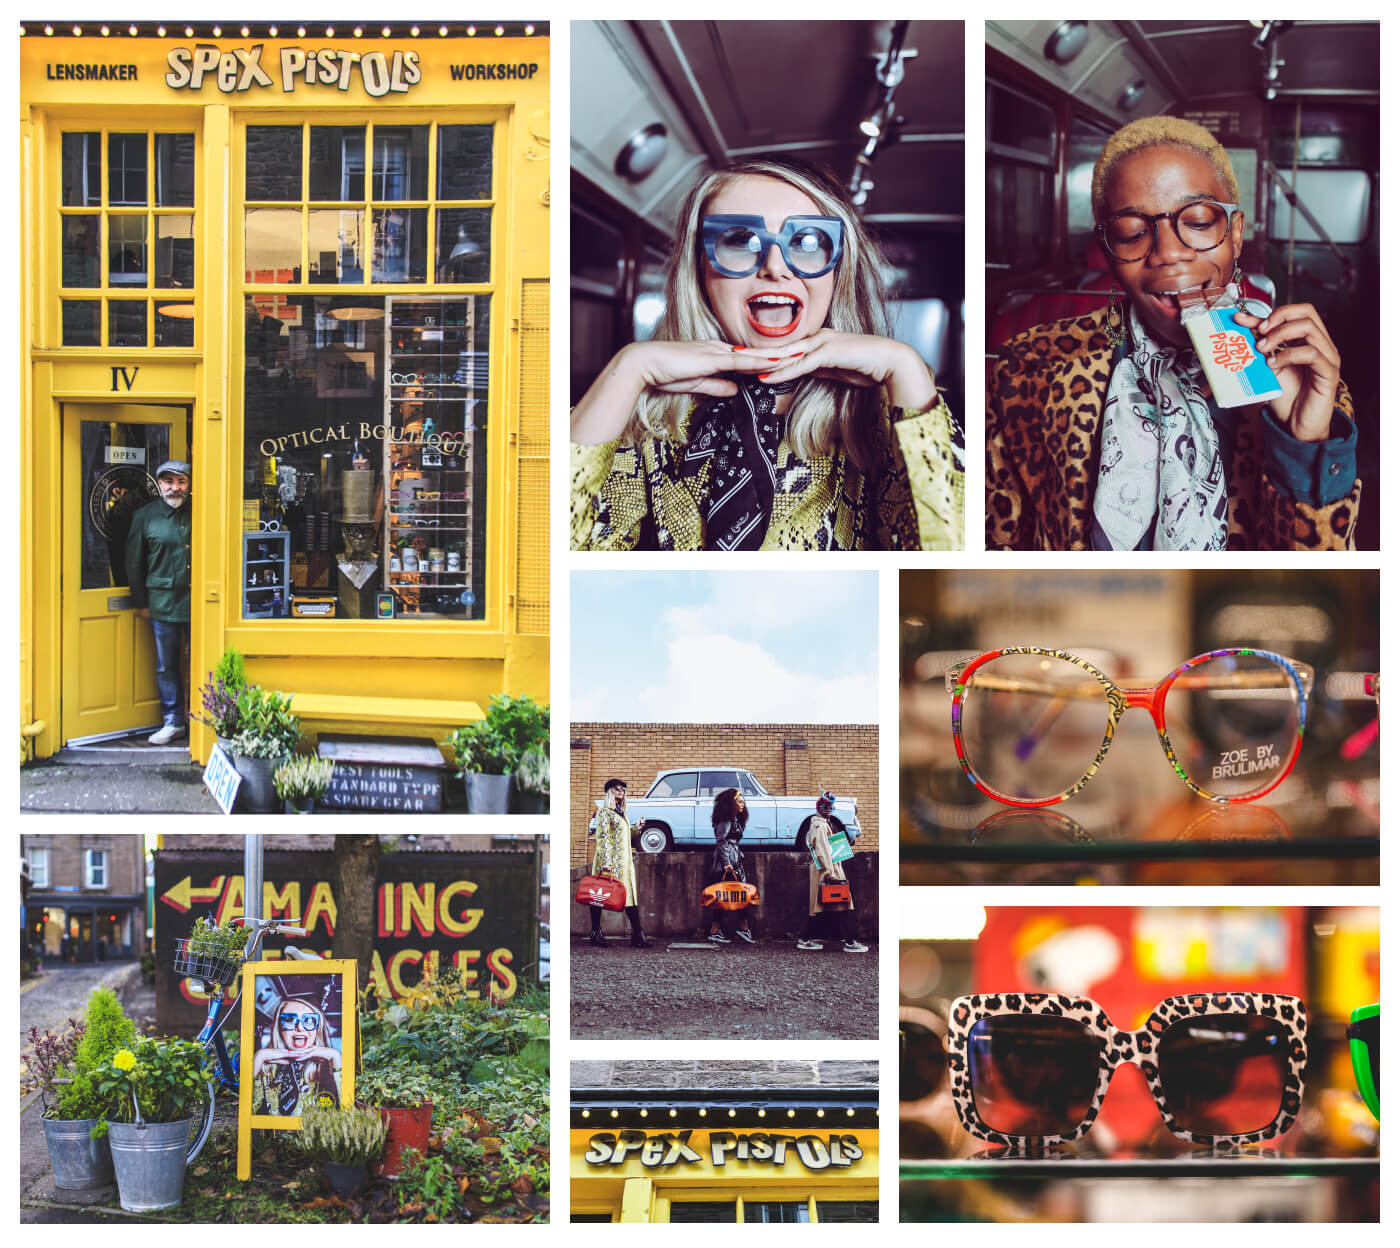 Grid of photos showing vintage spectacle frames, models dressed in vintage clothing and the Spex Pistols shop front.